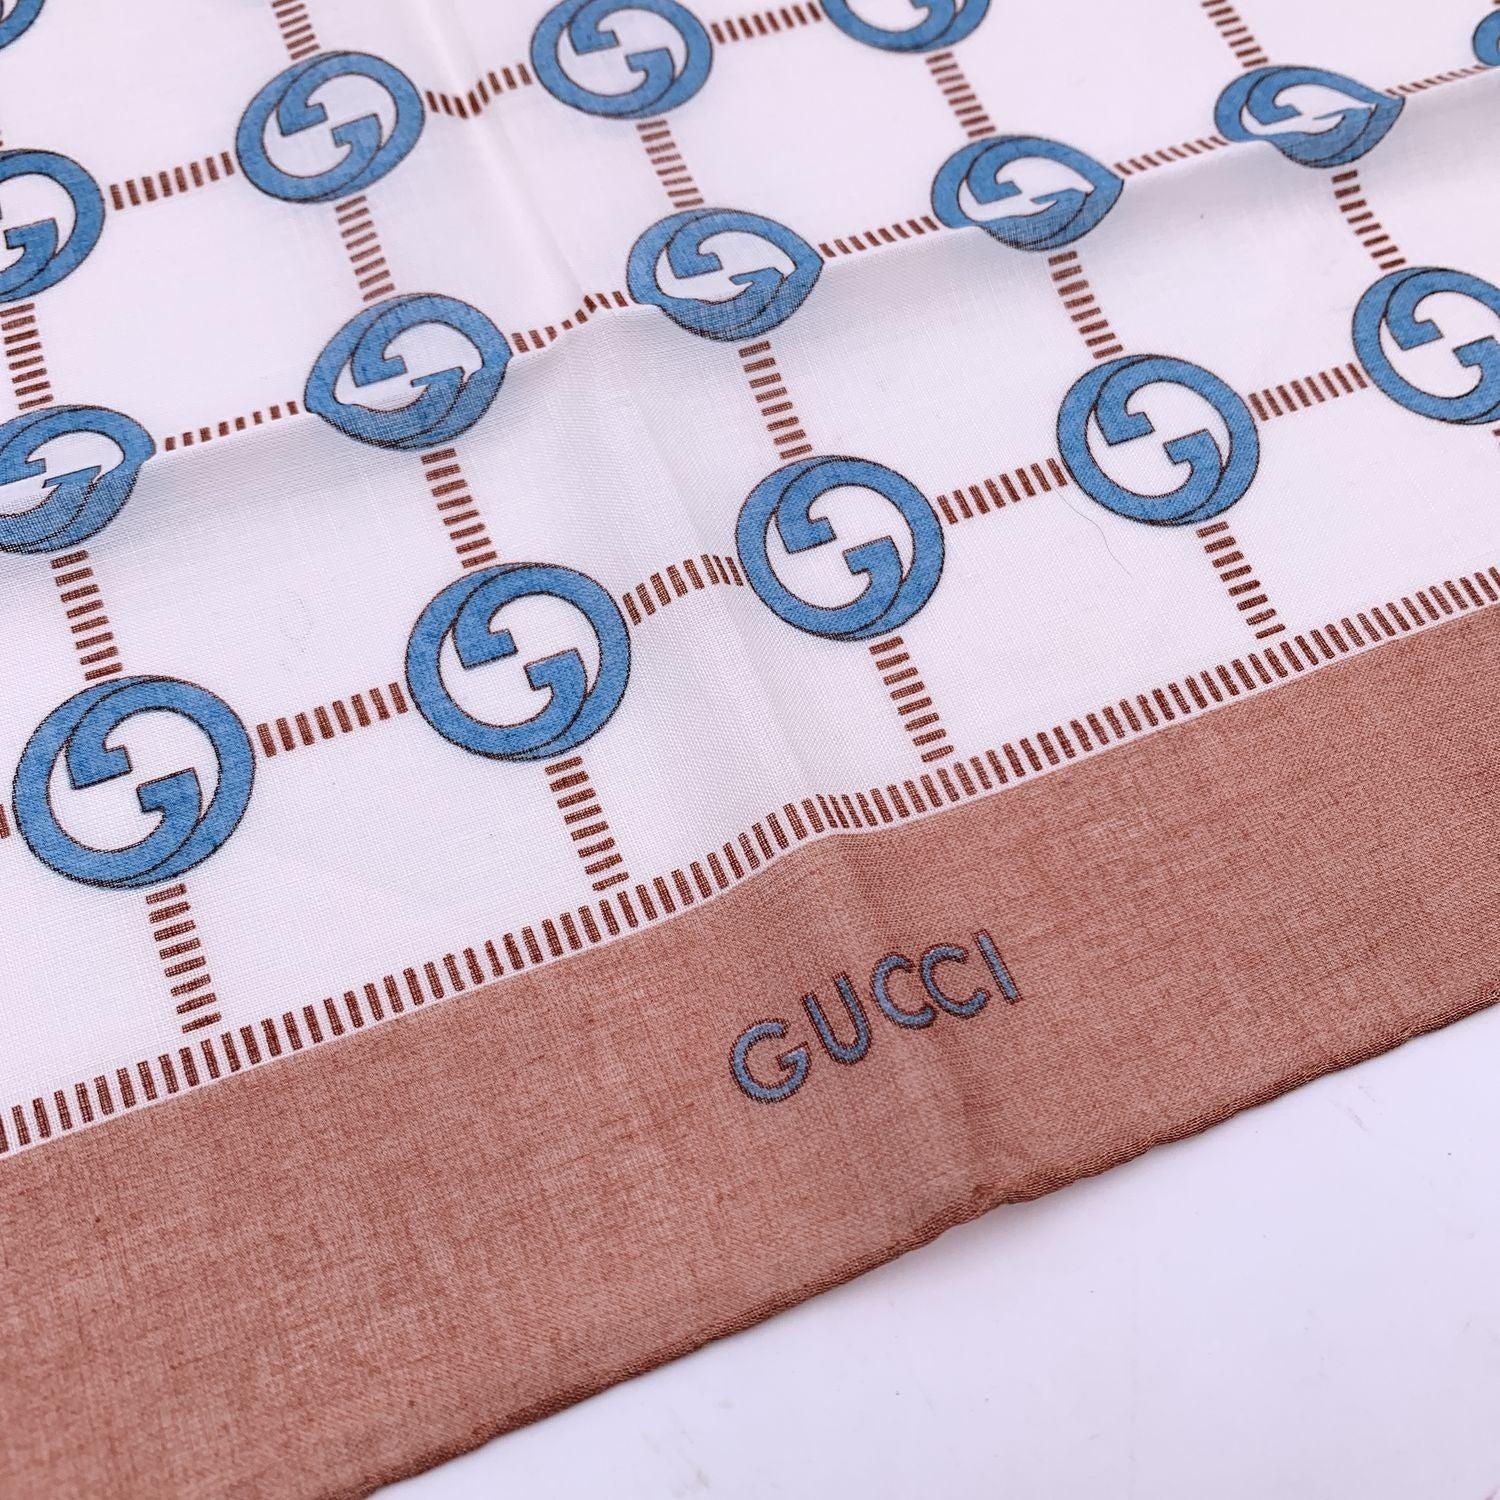 Vintage neck scarf by GUCCI. 100% Cotton. Light blue GG logo pattern with light brown borders. 'Gucci' signature printed on the lower center border. Approx. Measurements: 16.5 x 16.5 inches - 42 x 42 cm Details MATERIAL: Cotton COLOR: Brown MODEL: